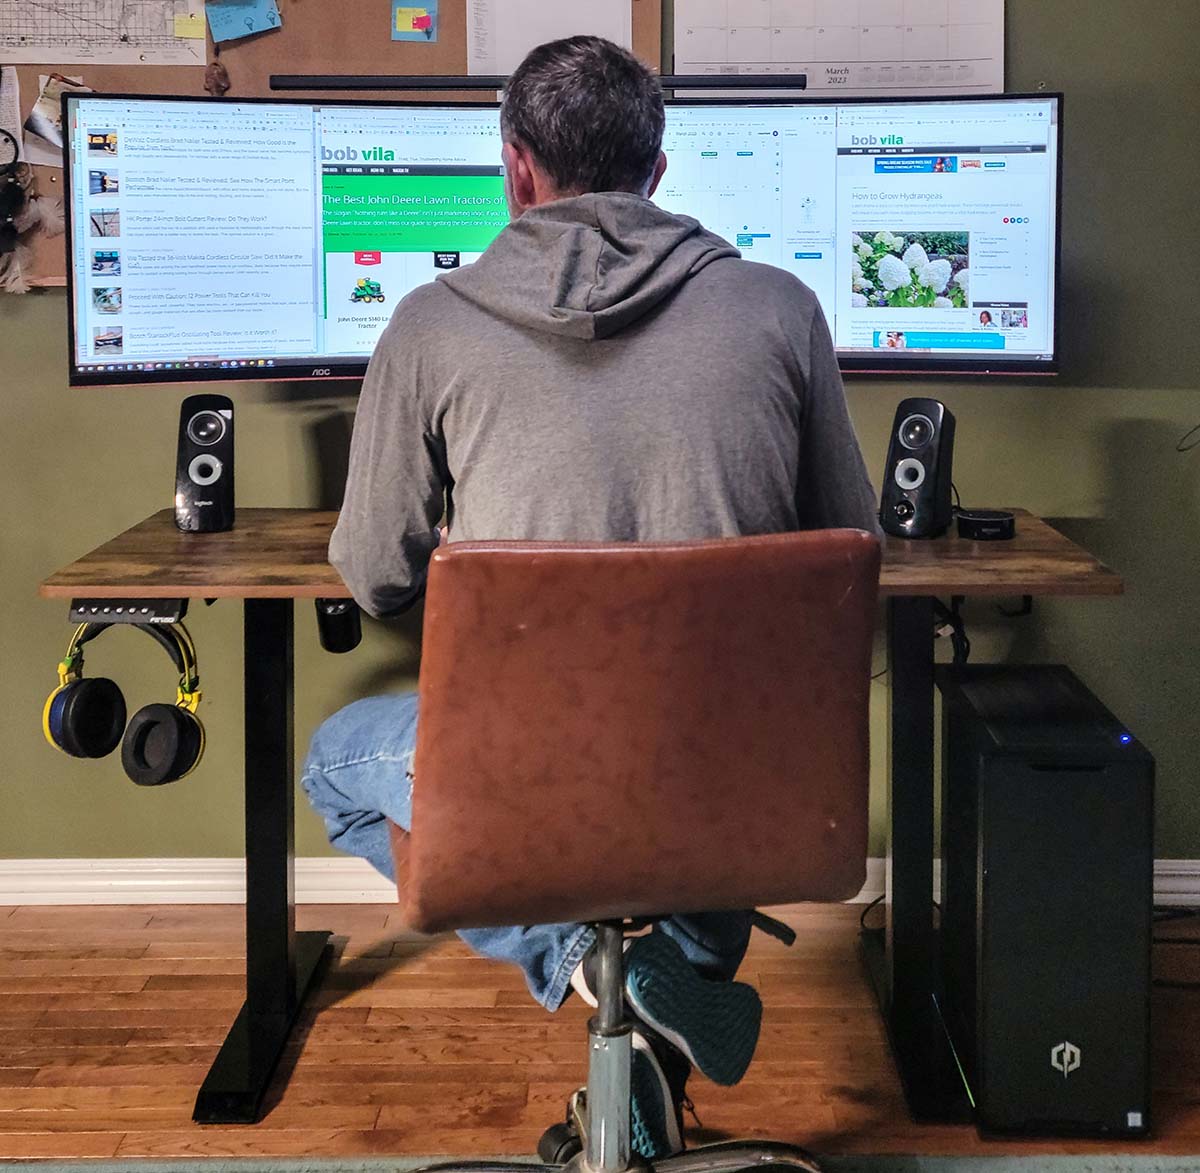 A man sits and works on a computer at the Fezibo standing desk